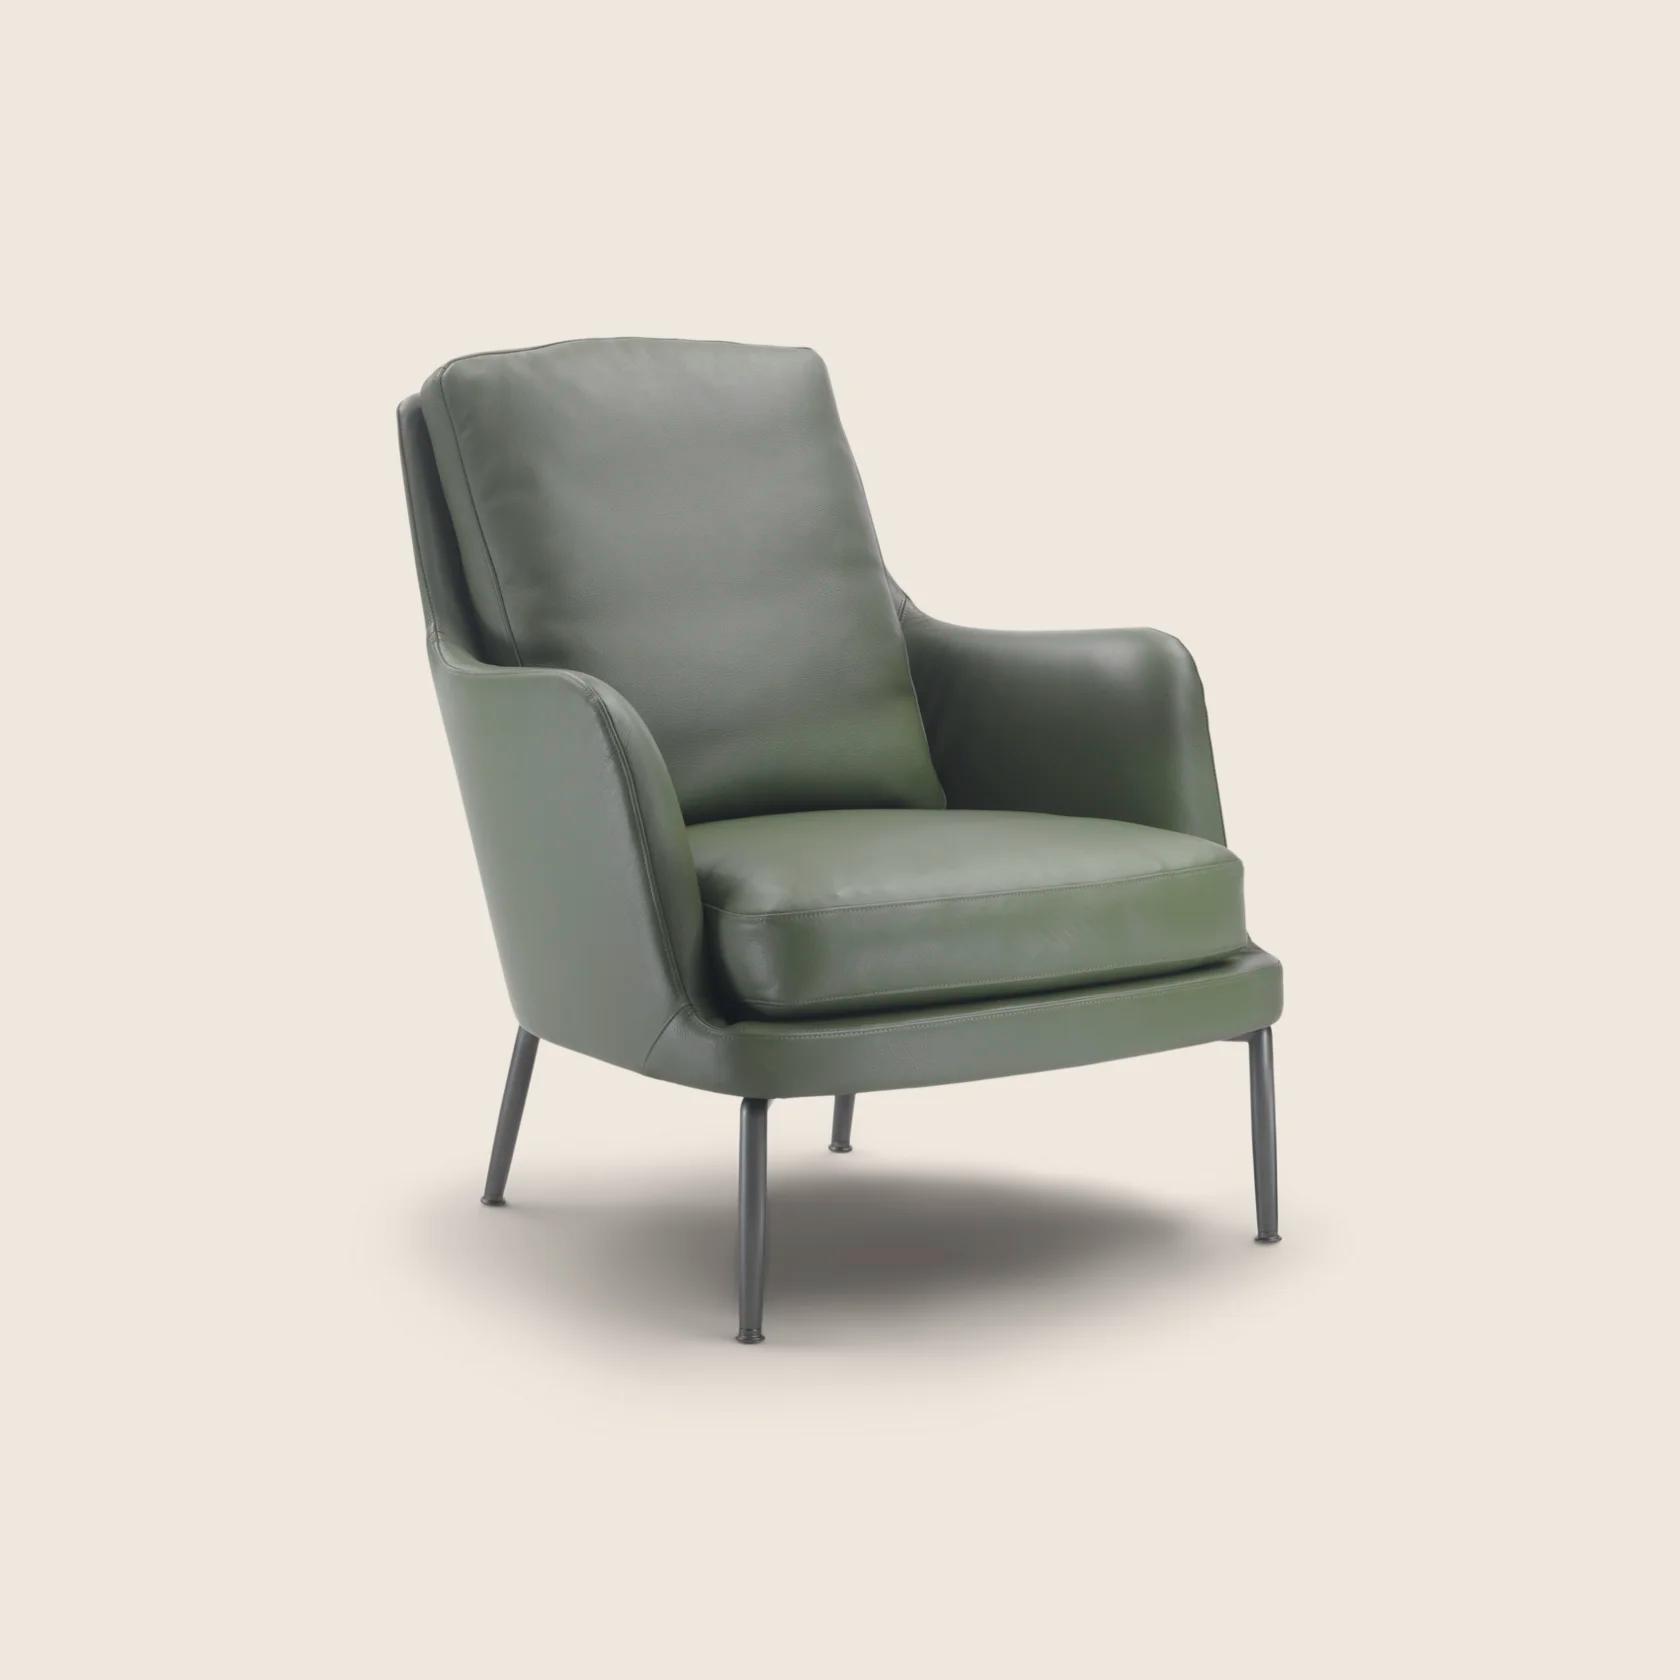 028623_MARLEY_ARMCHAIR_04.png